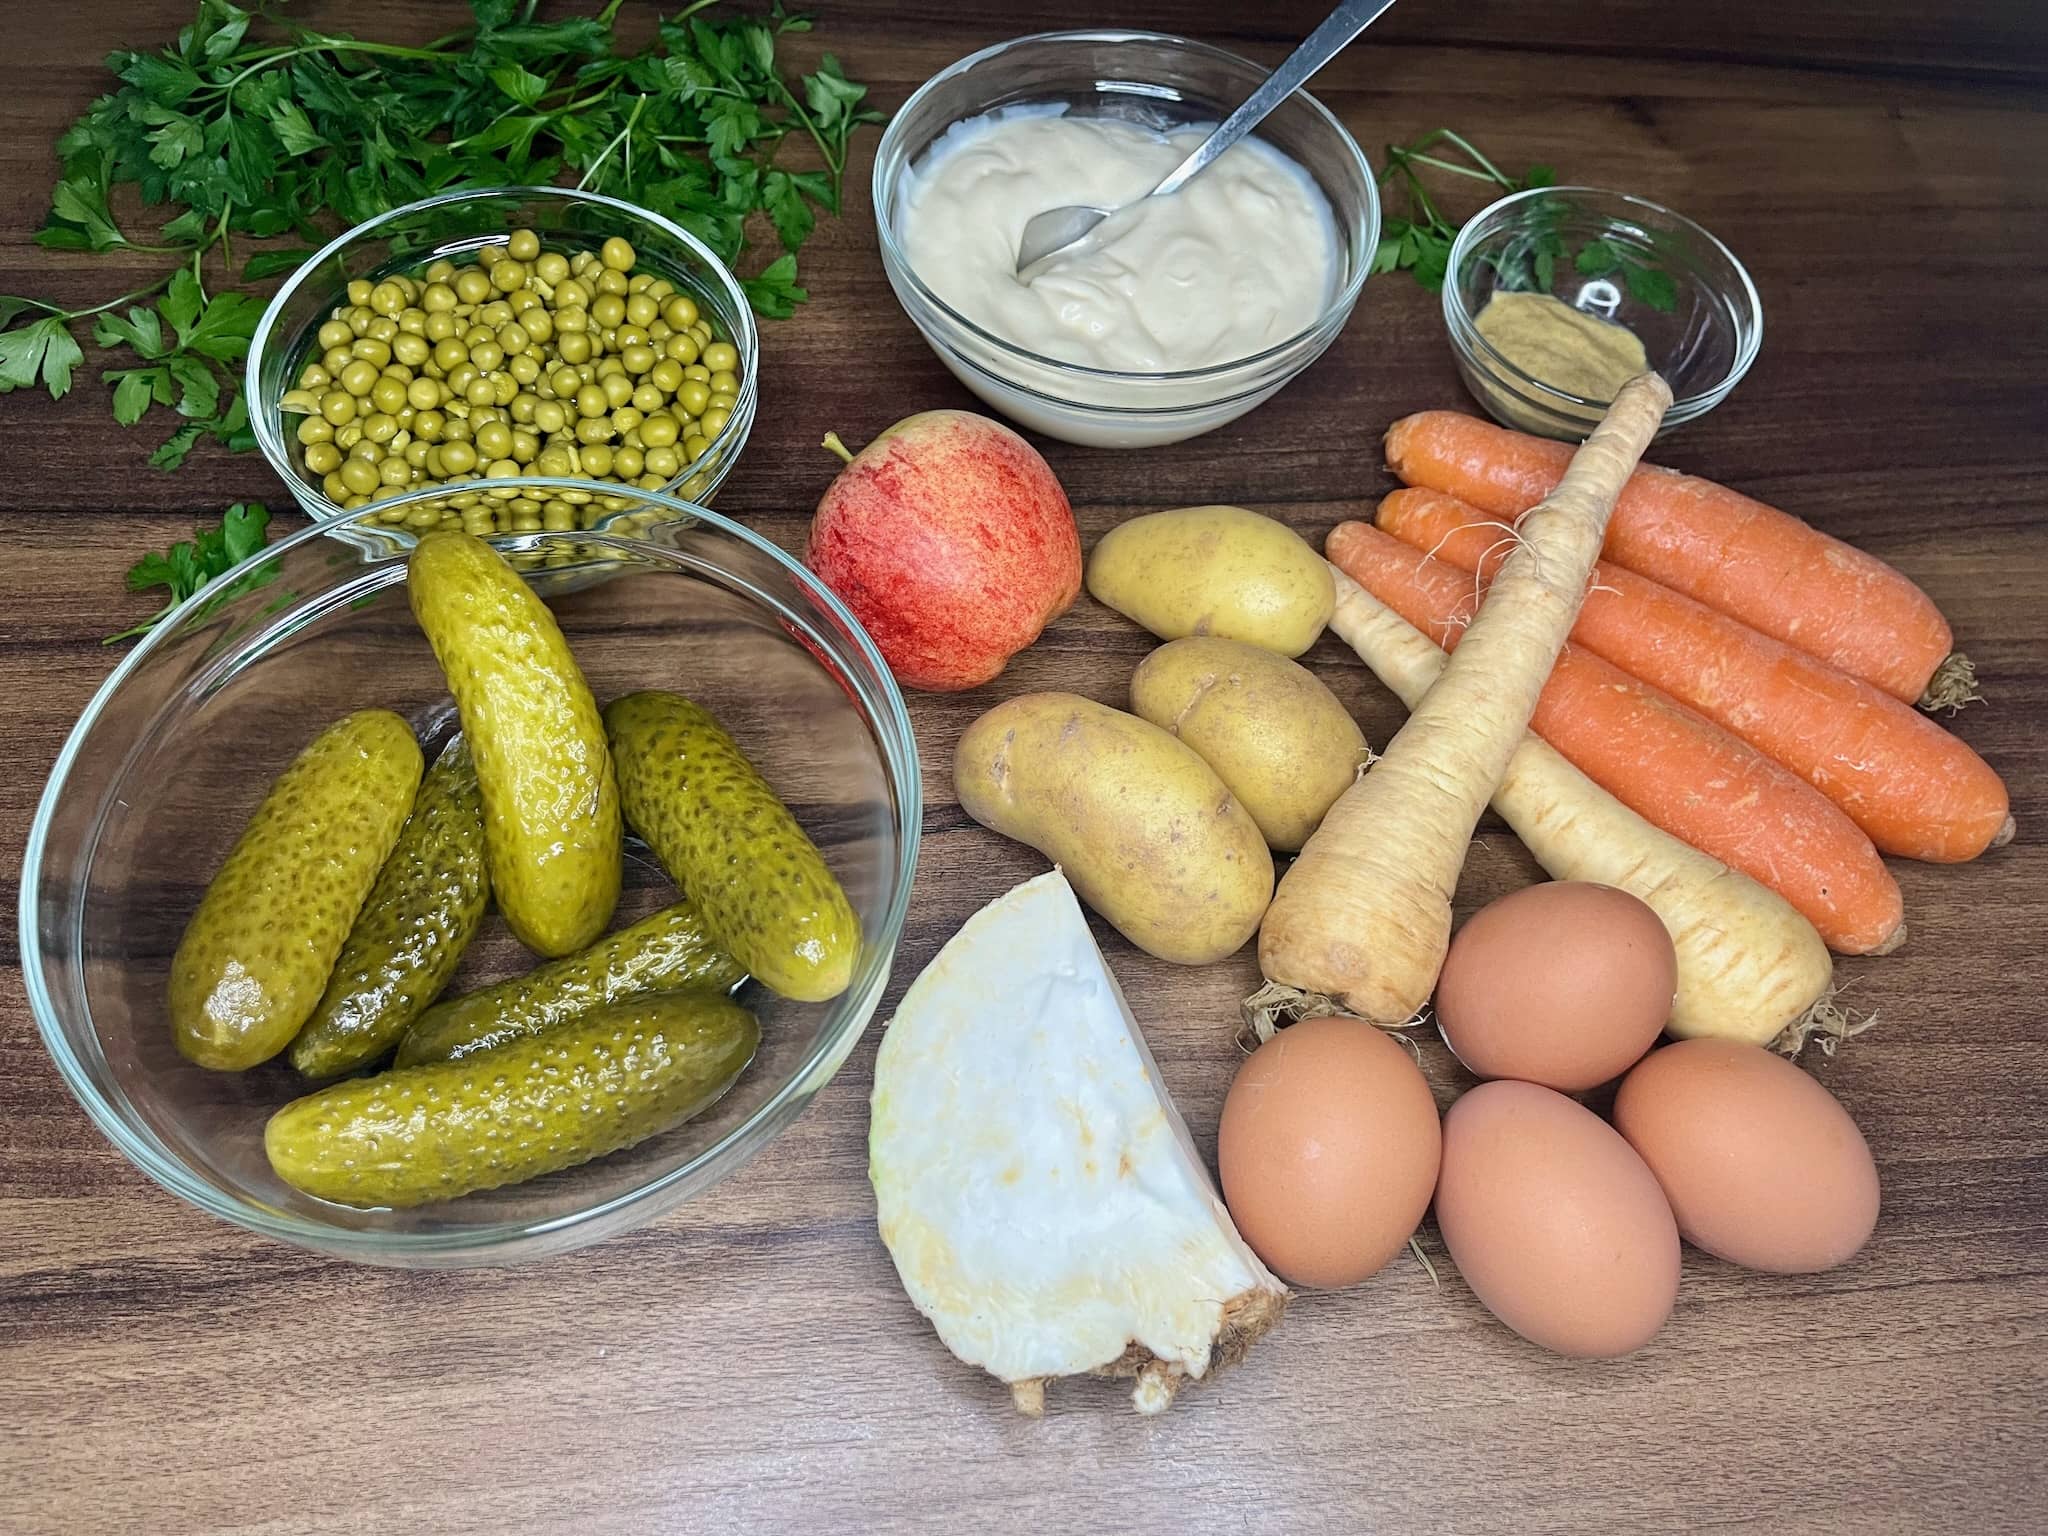 All the ingredients are neatly arranged on the tabletop, ready to make a Traditional Polish Vegetable Salad